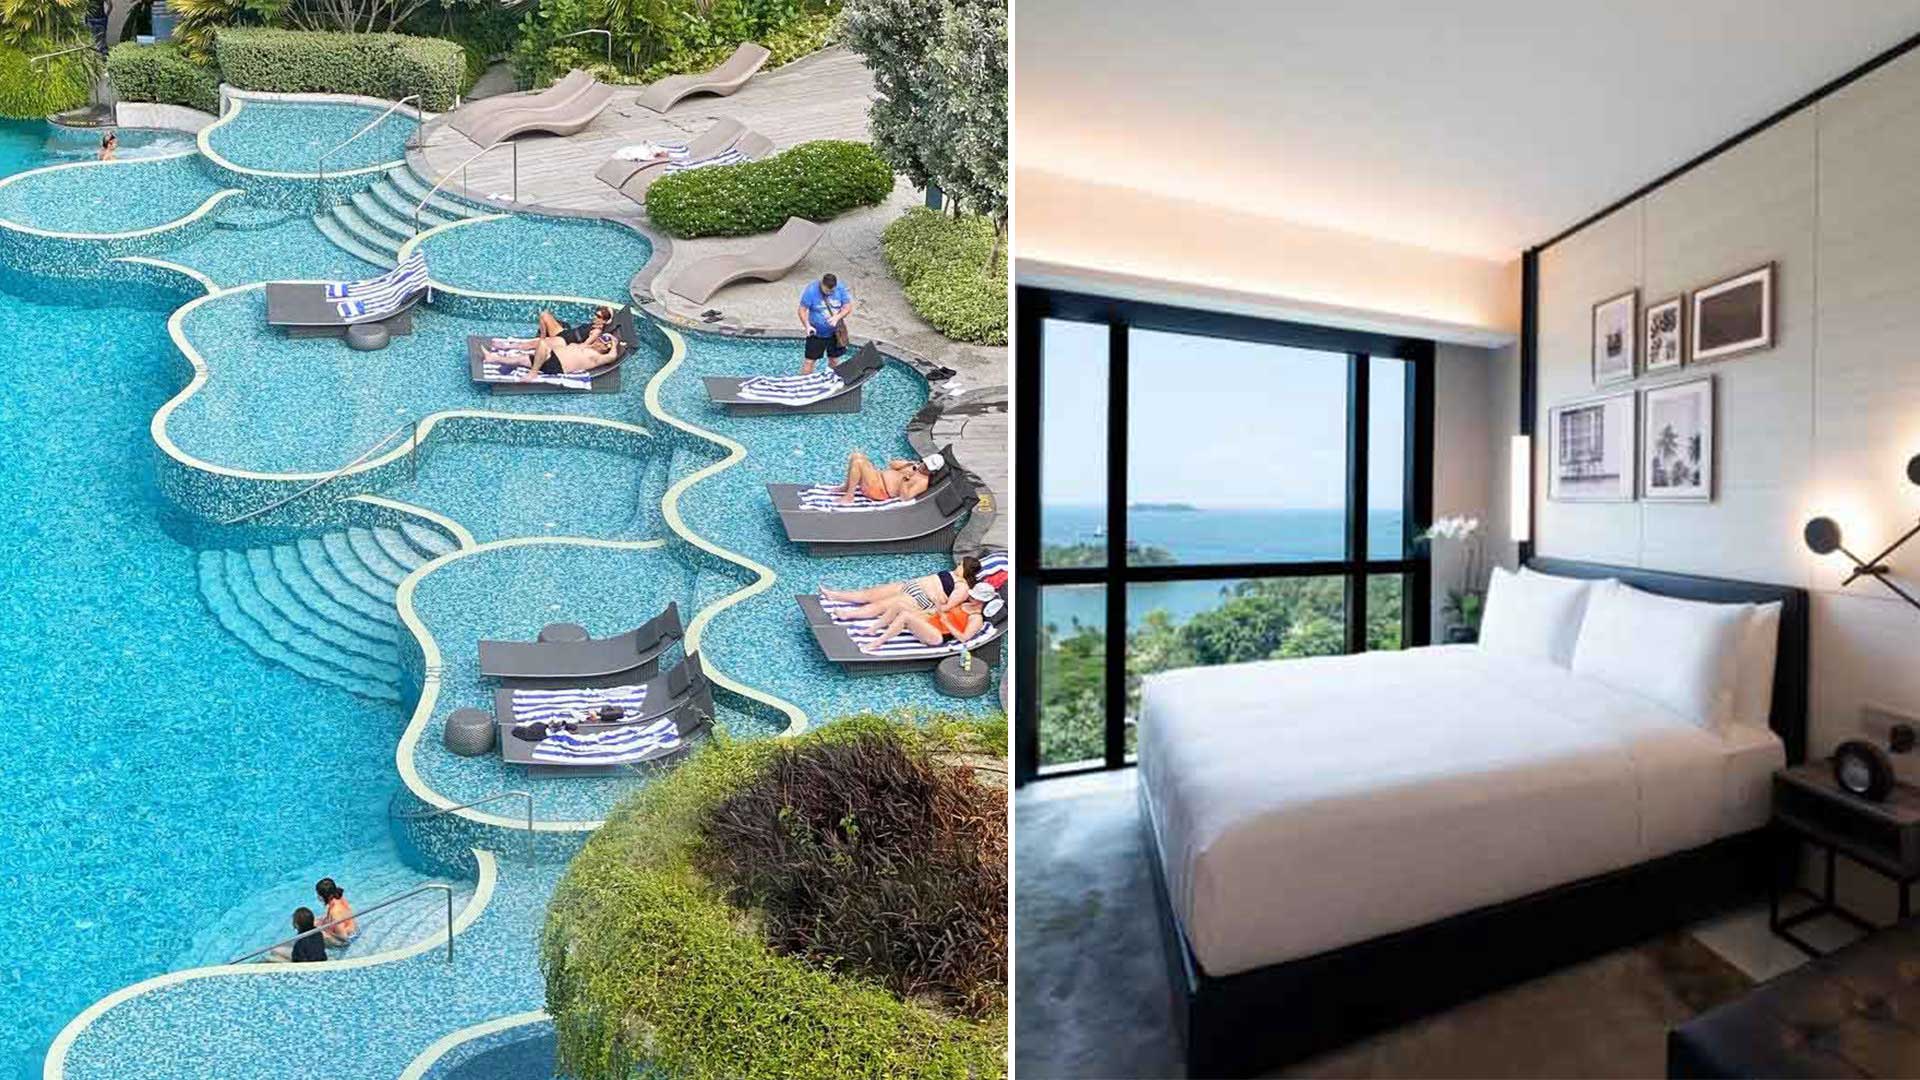 Can’t Go To Malaysia? This Luxury Sentosa Hotel Offers A Staycay From $230 A Night